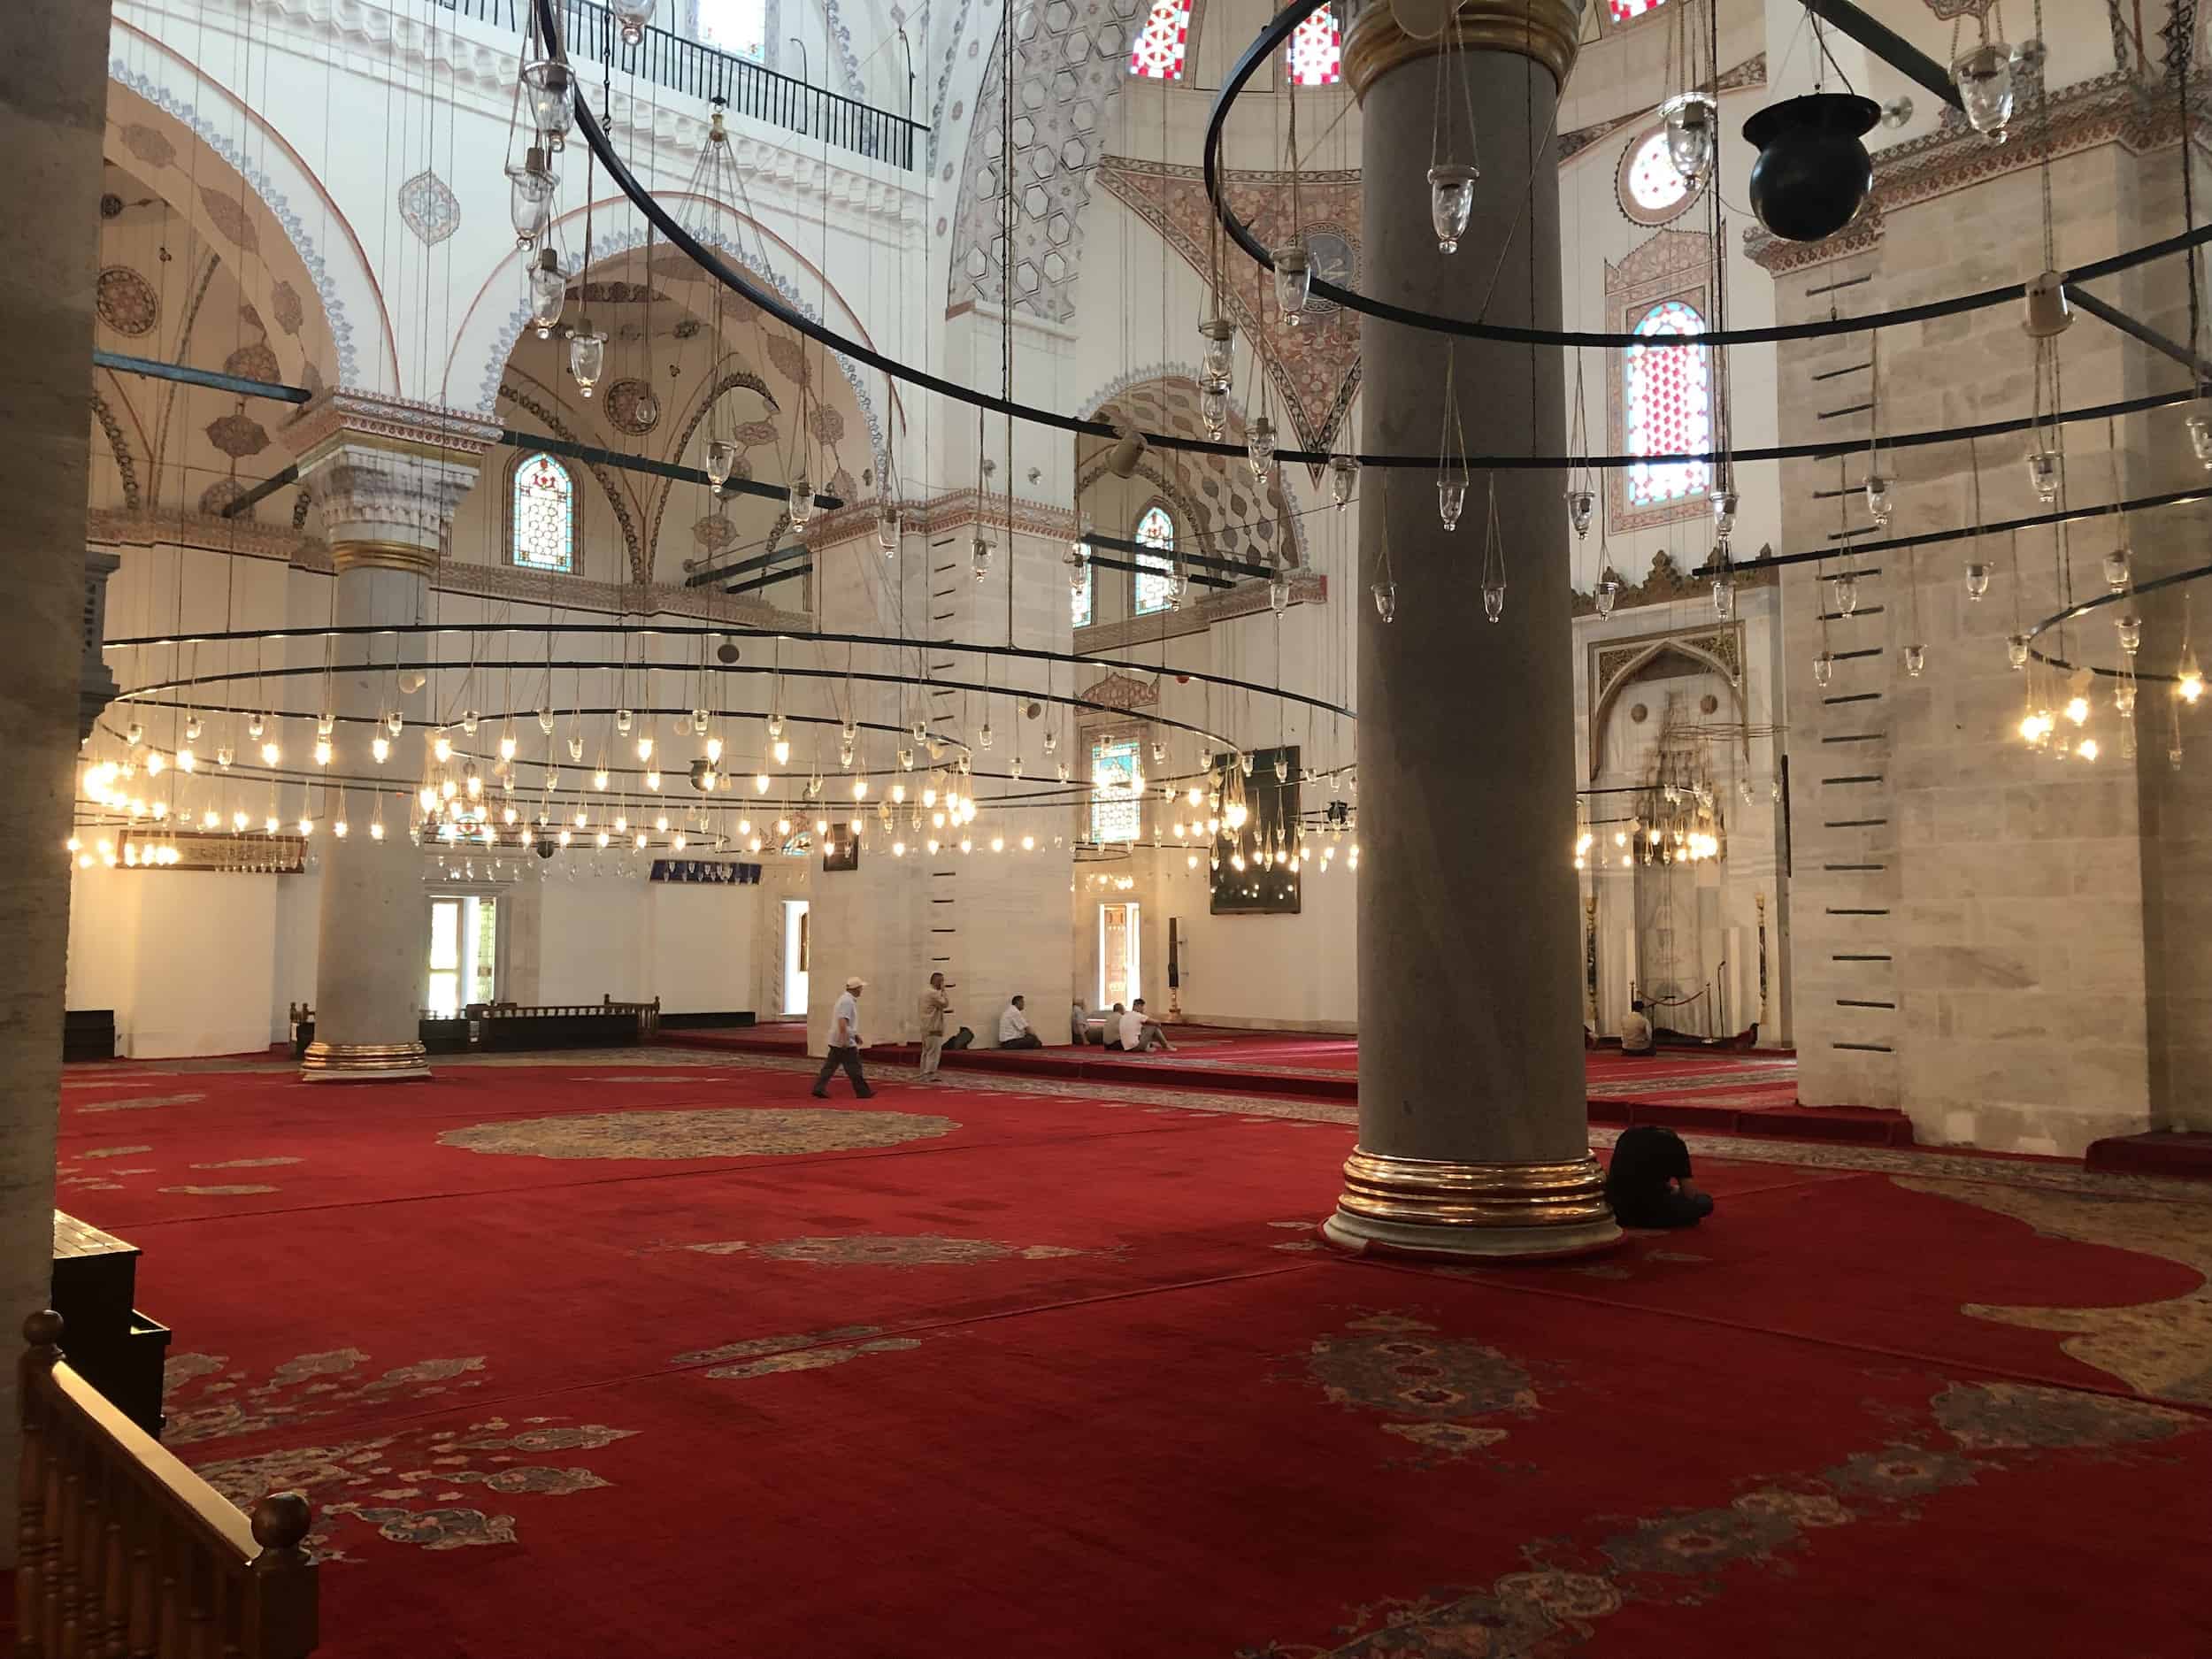 Prayer hall of the Bayezid II Mosque in Istanbul, Turkey